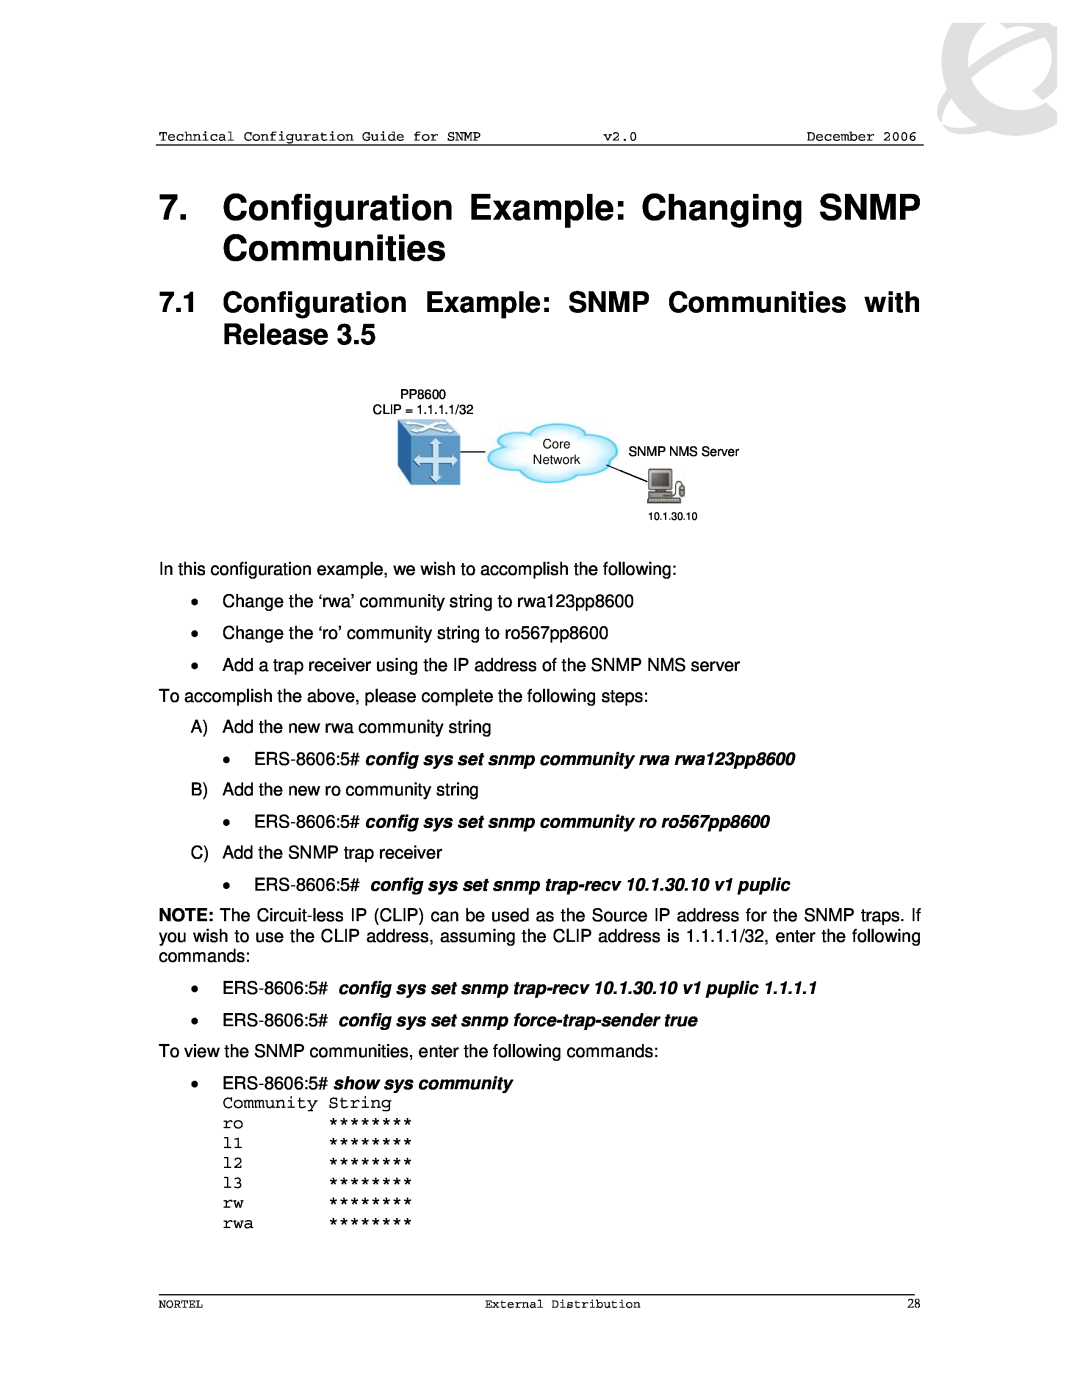 Nortel Networks 8600 Configuration Example Changing SNMP Communities, Configuration Example SNMP Communities with Release 